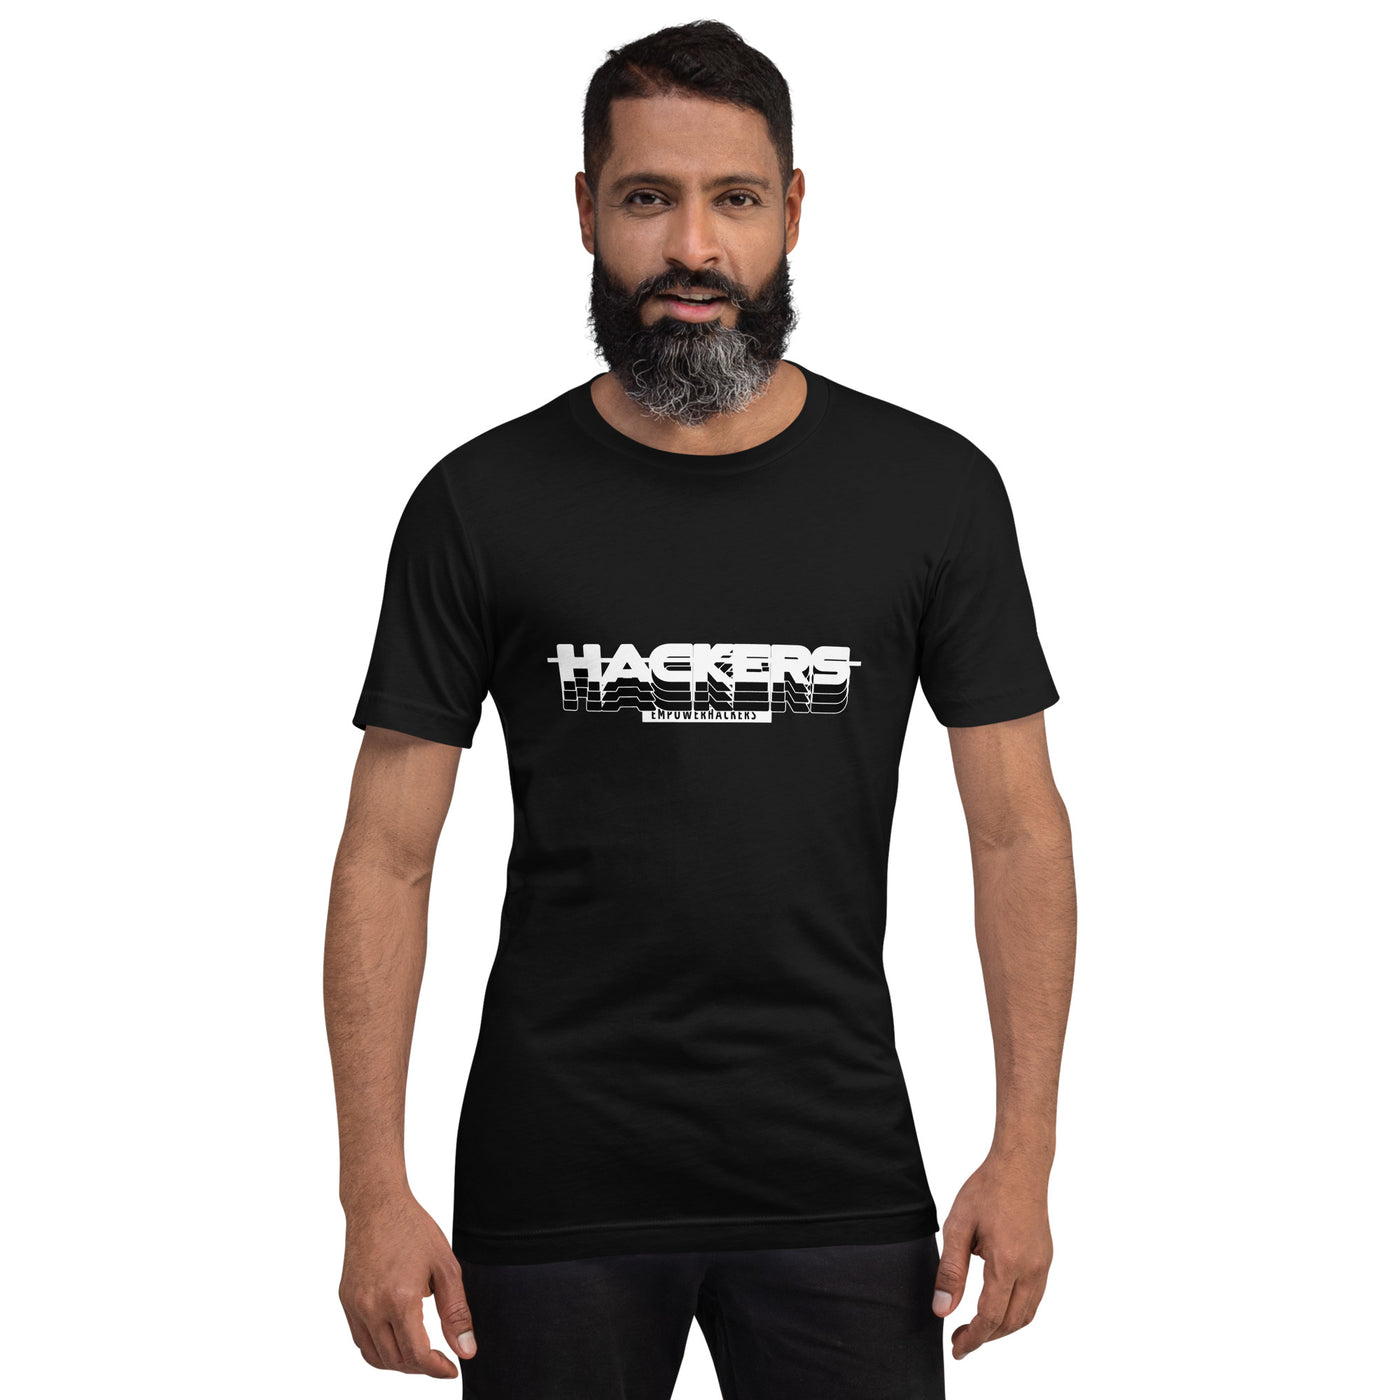 Hackers Empower Hackers V3 - Unisex t-shirt